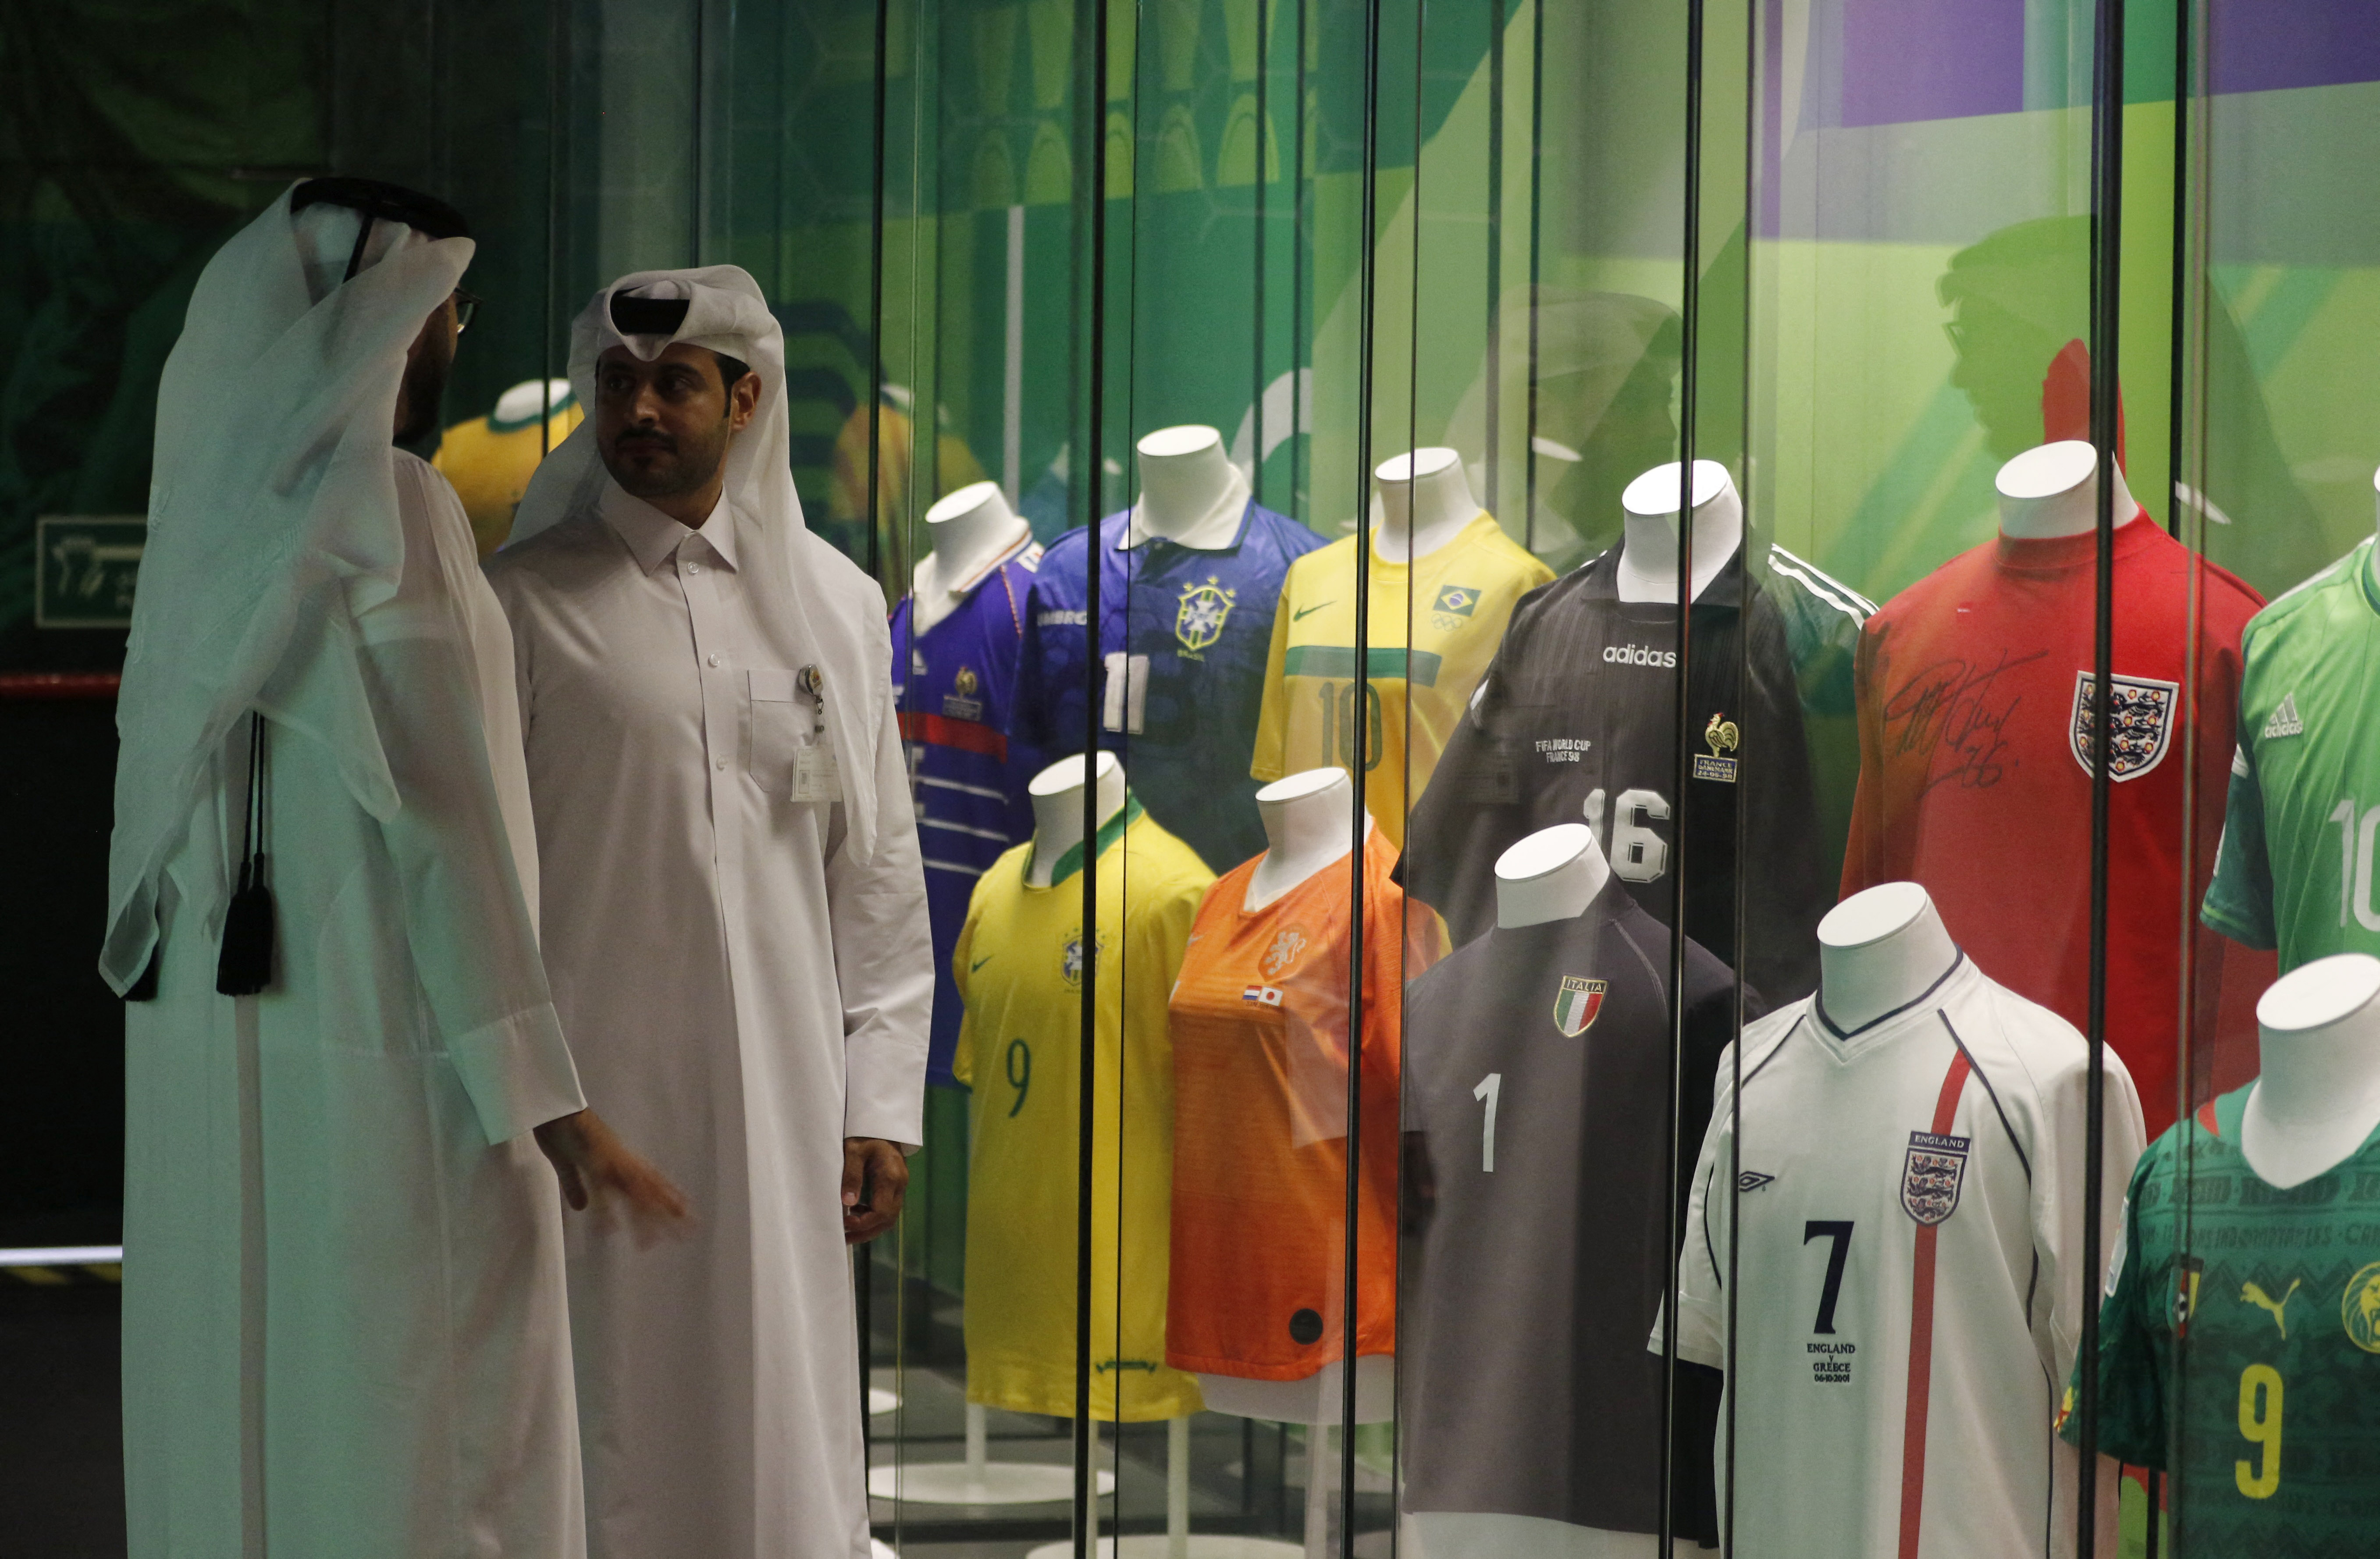 FIFA World Cup Qatar 2022 Preview - World of Football Exhibition